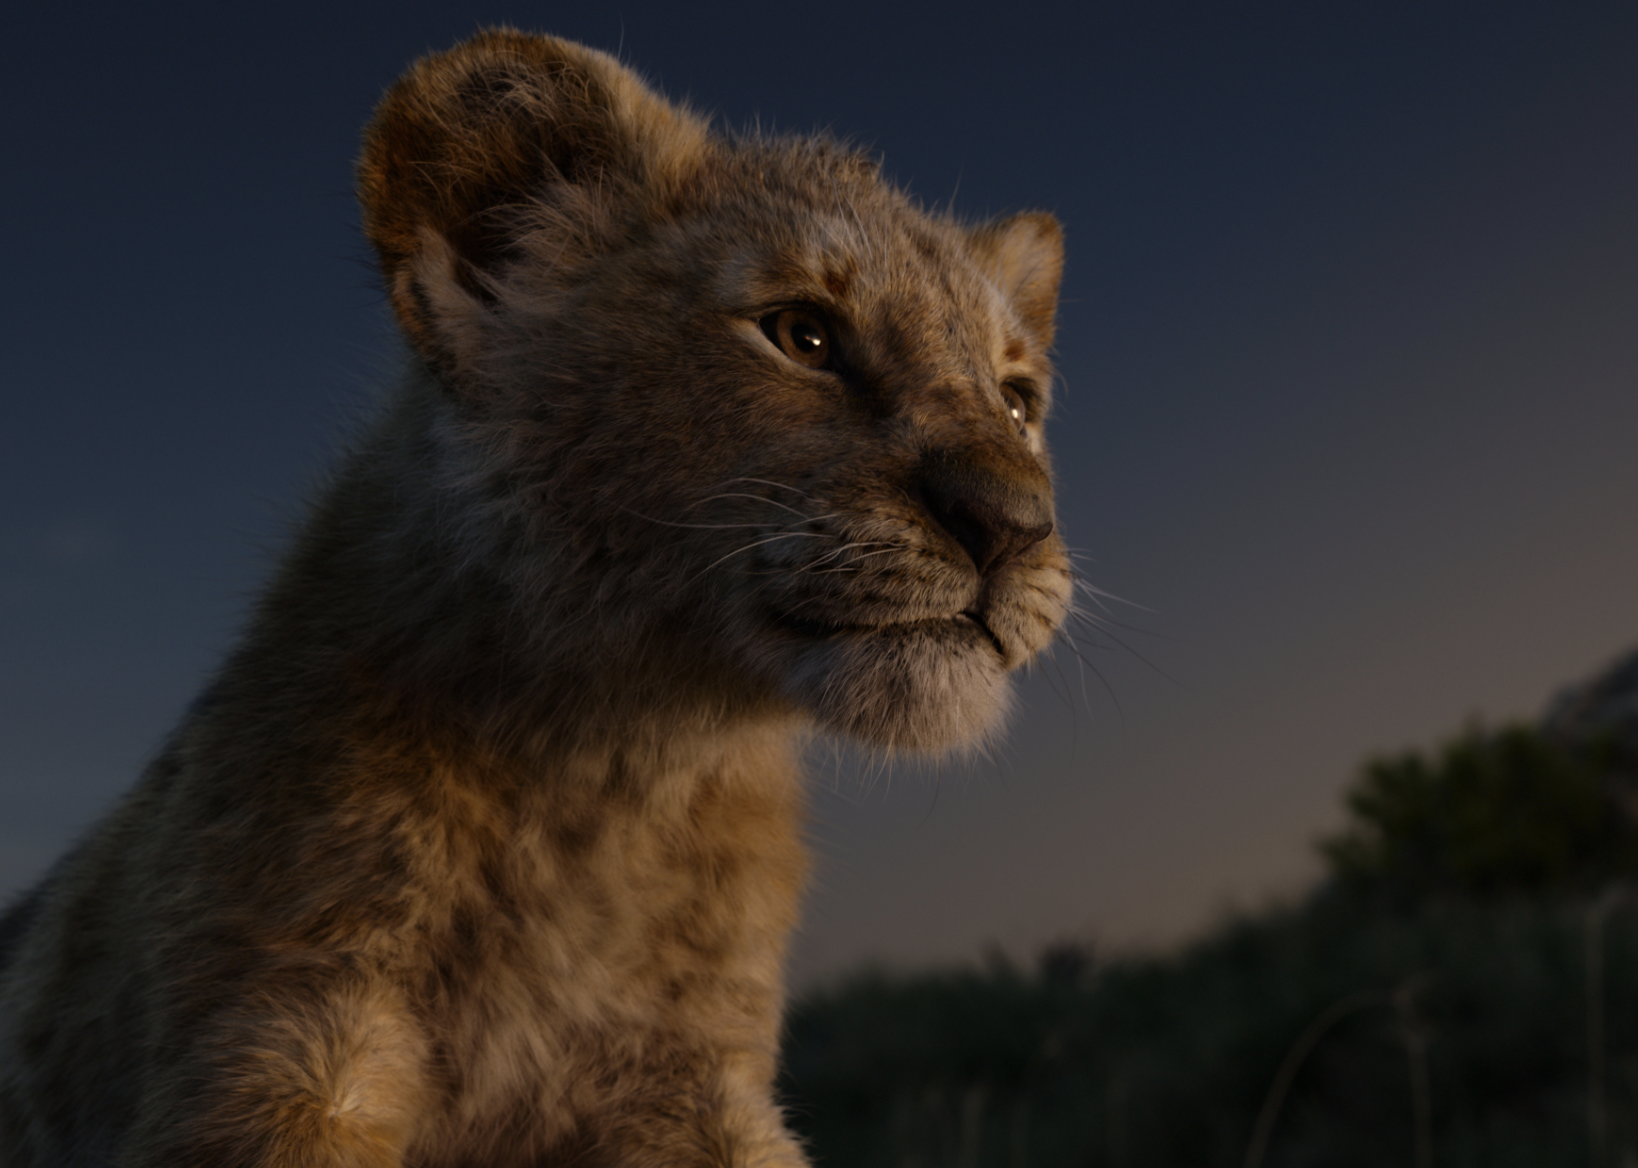 A scene with Simba as a cub at night from 